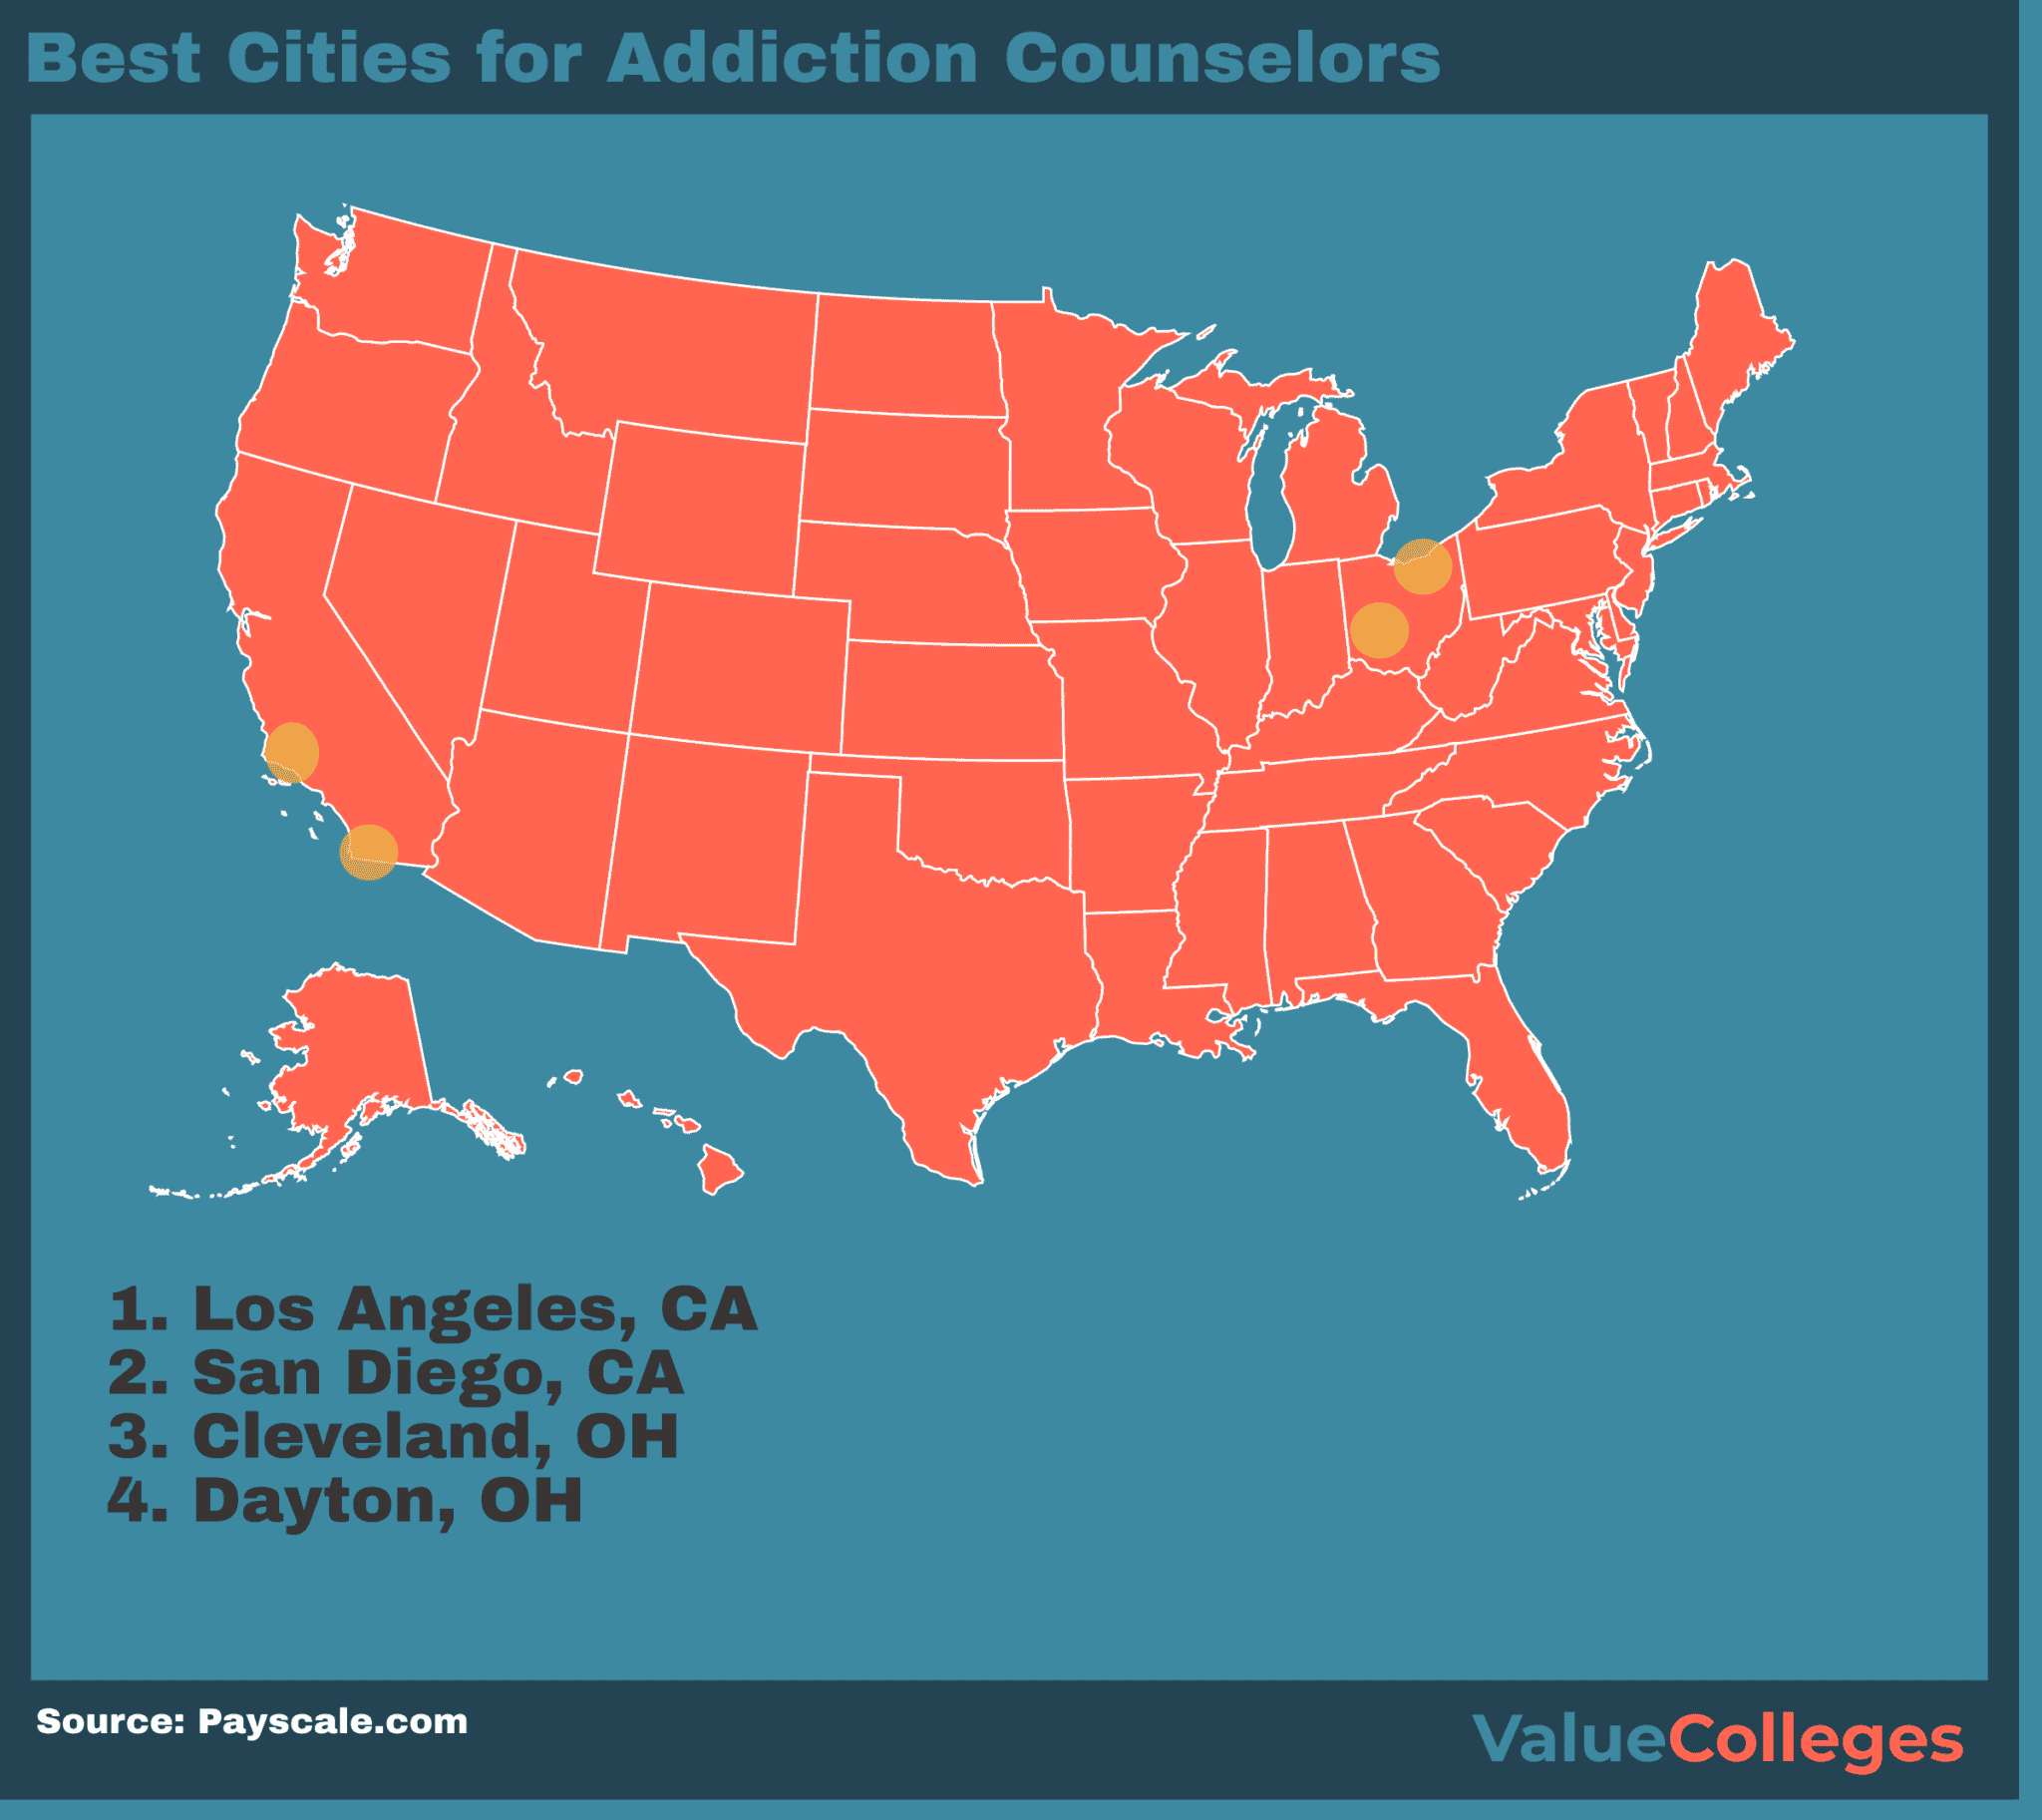 What Can I Do with a Degree in Addiction Counseling?